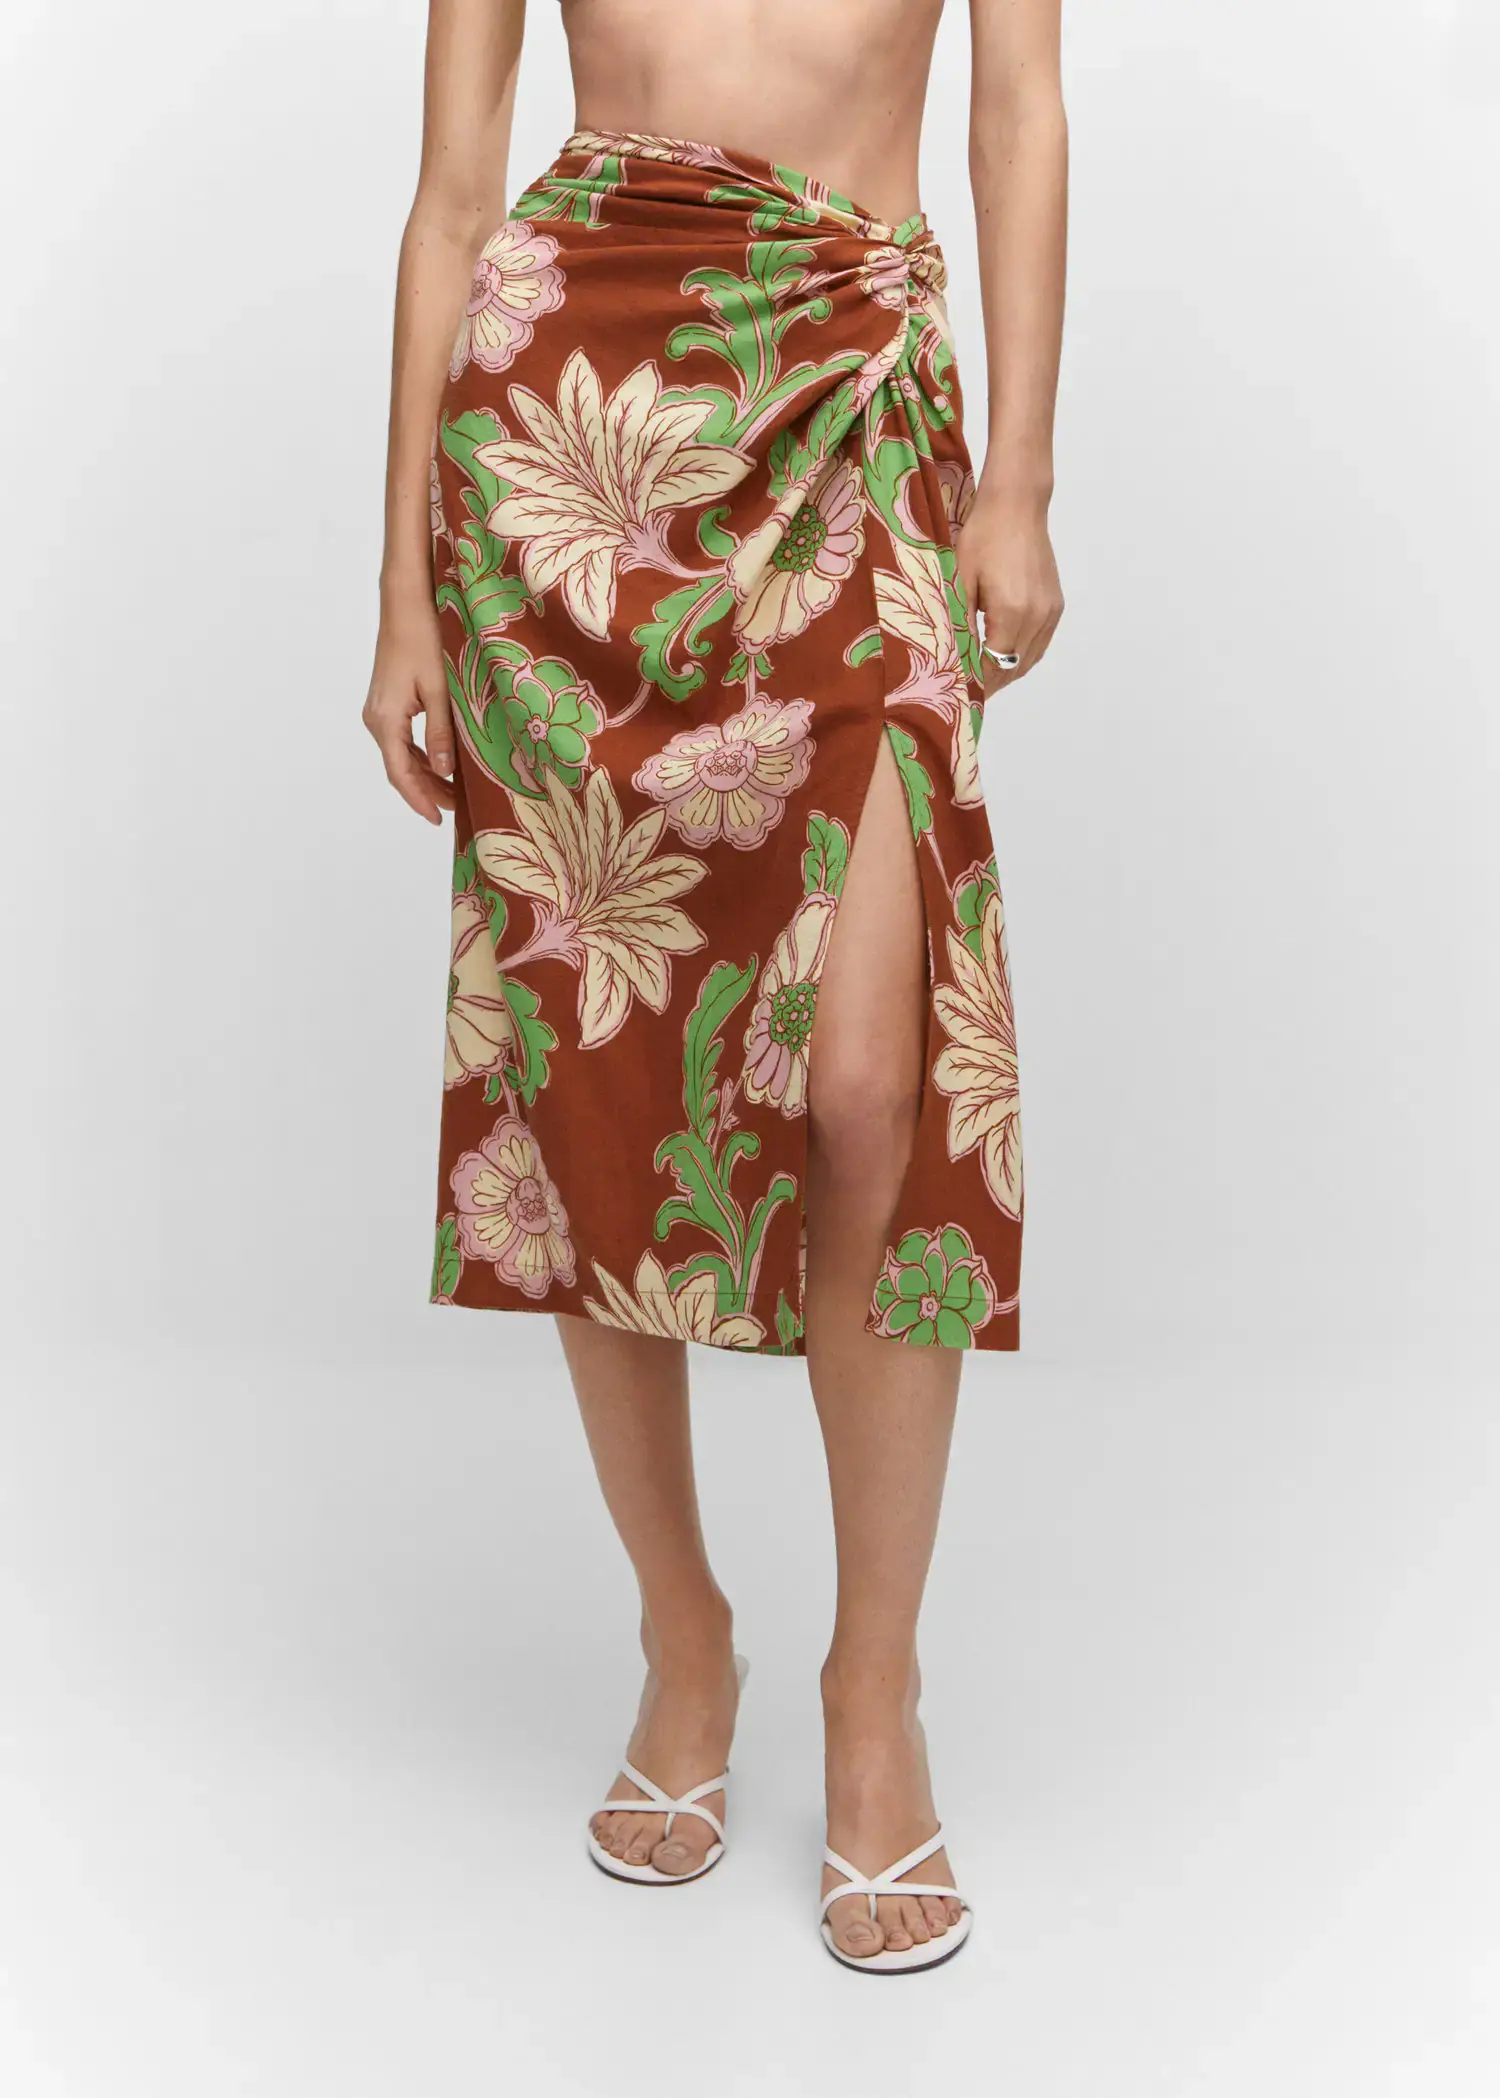 Mango Knot printed skirt. a woman in a floral skirt and white sandals. 